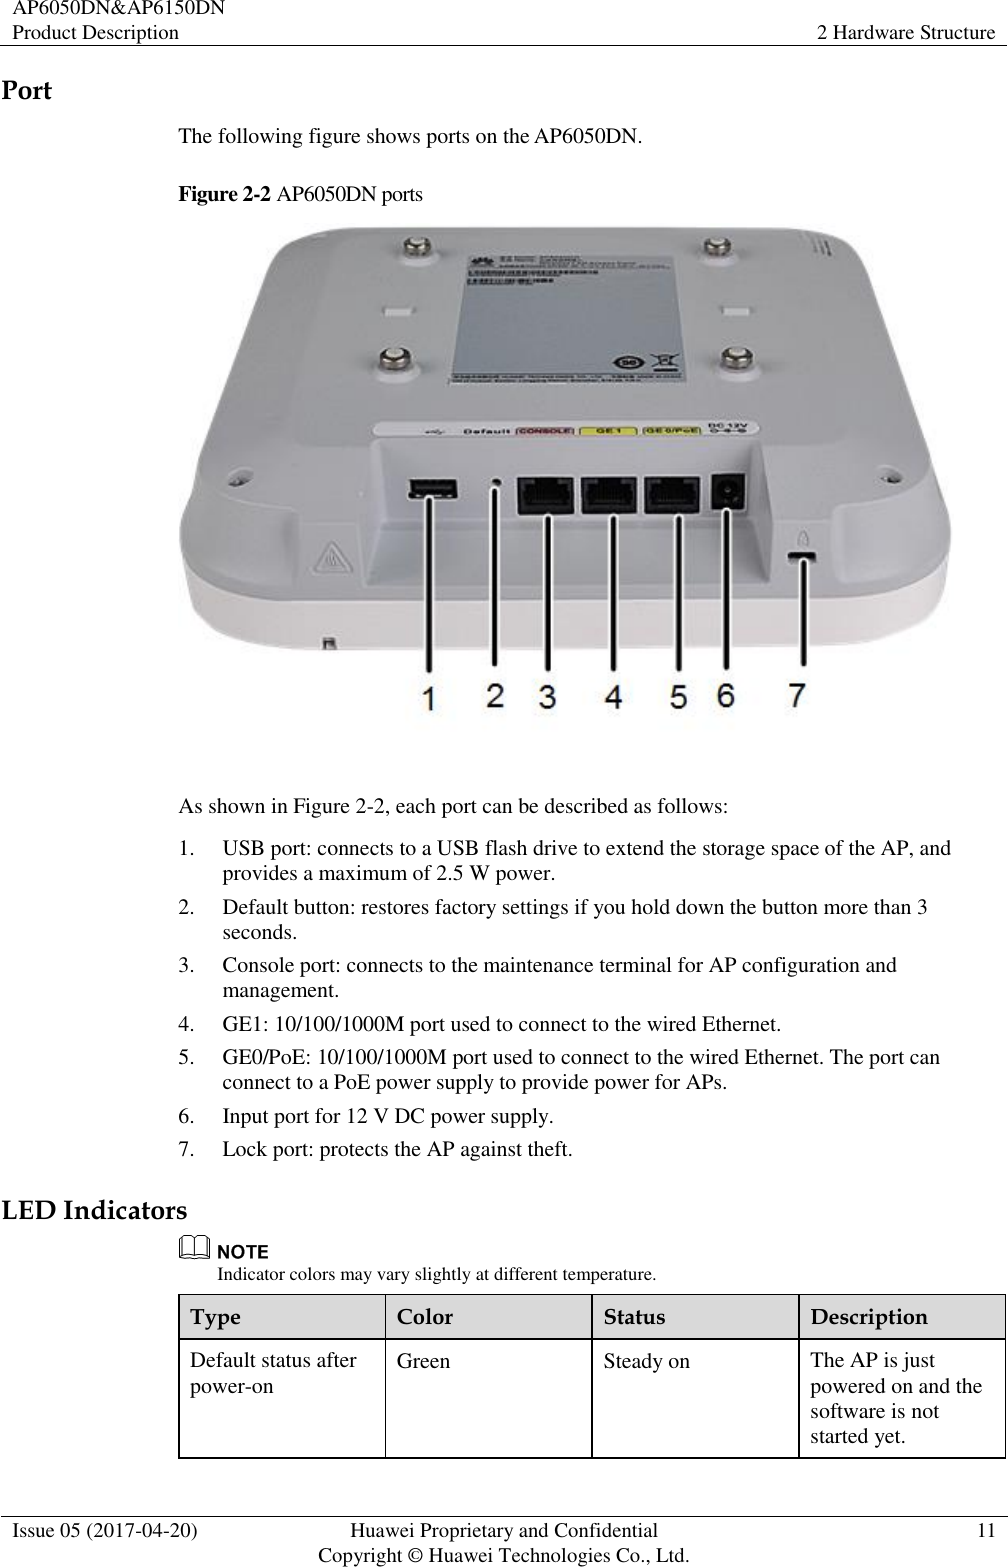 AP6050DN&amp;AP6150DN Product Description 2 Hardware Structure  Issue 05 (2017-04-20) Huawei Proprietary and Confidential                                     Copyright © Huawei Technologies Co., Ltd. 11  Port The following figure shows ports on the AP6050DN. Figure 2-2 AP6050DN ports   As shown in Figure 2-2, each port can be described as follows: 1. USB port: connects to a USB flash drive to extend the storage space of the AP, and provides a maximum of 2.5 W power. 2. Default button: restores factory settings if you hold down the button more than 3 seconds. 3. Console port: connects to the maintenance terminal for AP configuration and management. 4. GE1: 10/100/1000M port used to connect to the wired Ethernet. 5. GE0/PoE: 10/100/1000M port used to connect to the wired Ethernet. The port can connect to a PoE power supply to provide power for APs. 6. Input port for 12 V DC power supply. 7. Lock port: protects the AP against theft. LED Indicators  Indicator colors may vary slightly at different temperature. Type Color Status Description Default status after power-on Green Steady on The AP is just powered on and the software is not started yet. 